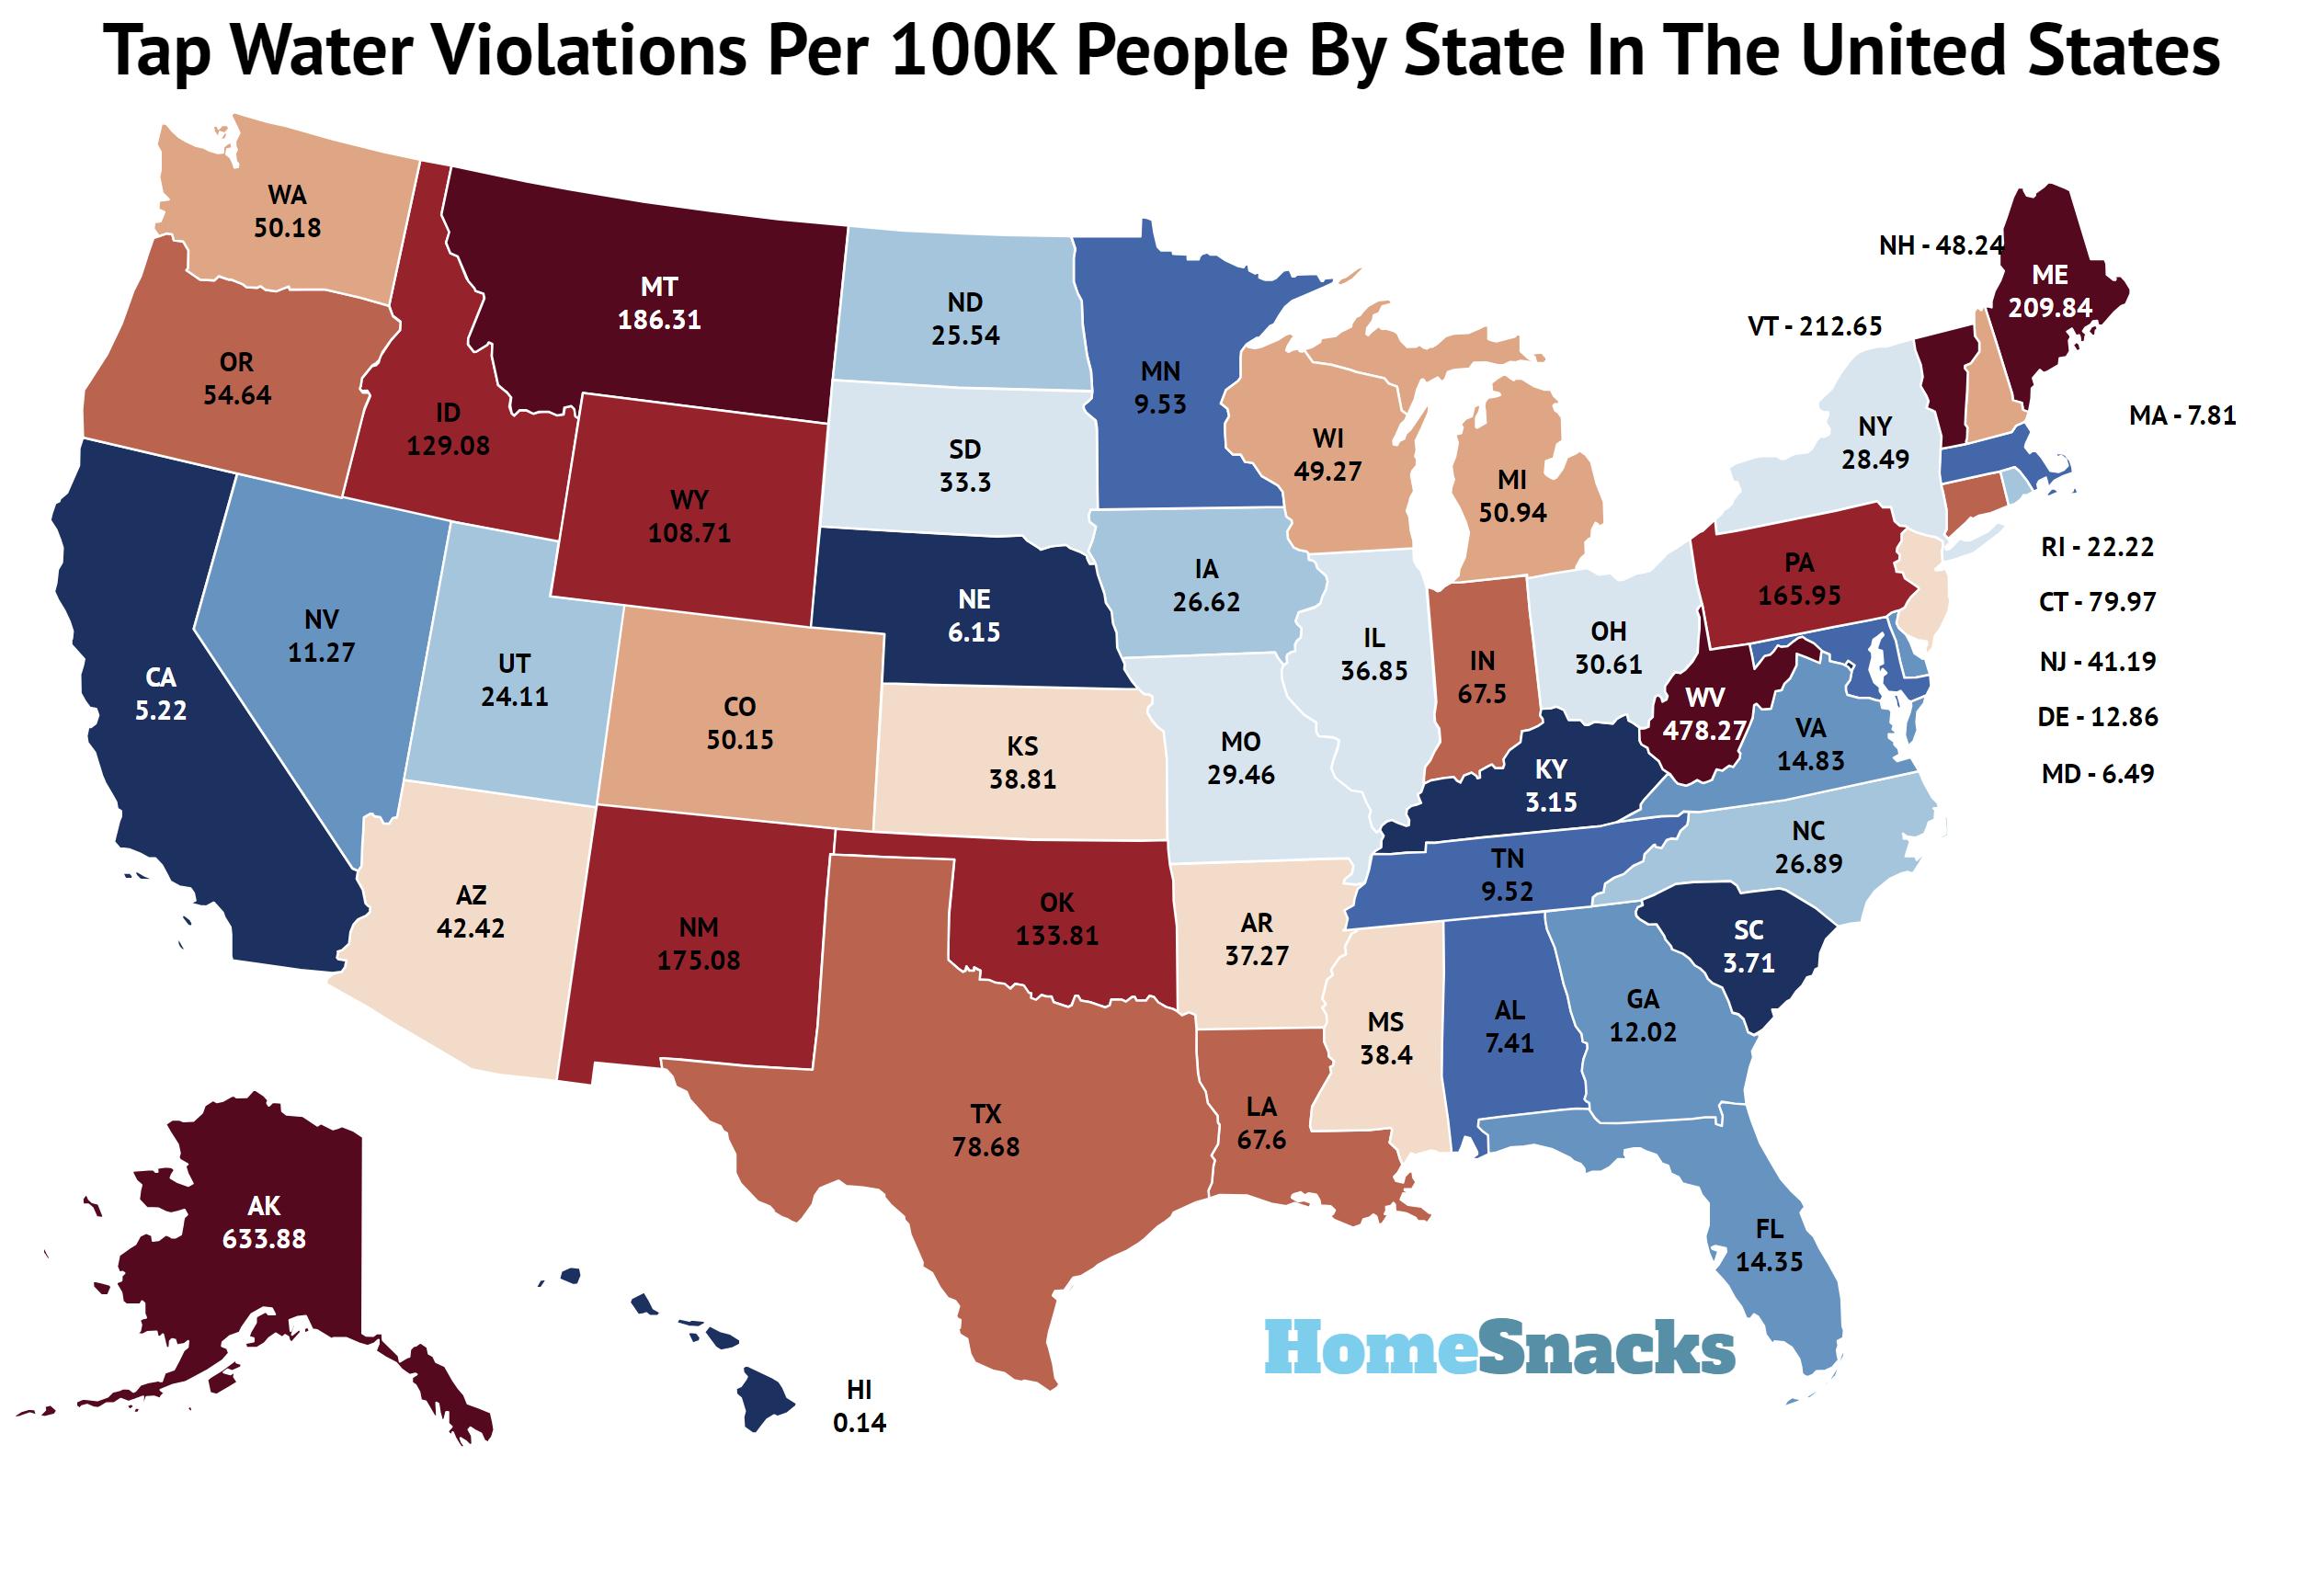 Tap Water Violations Per 100K People By State In The United States